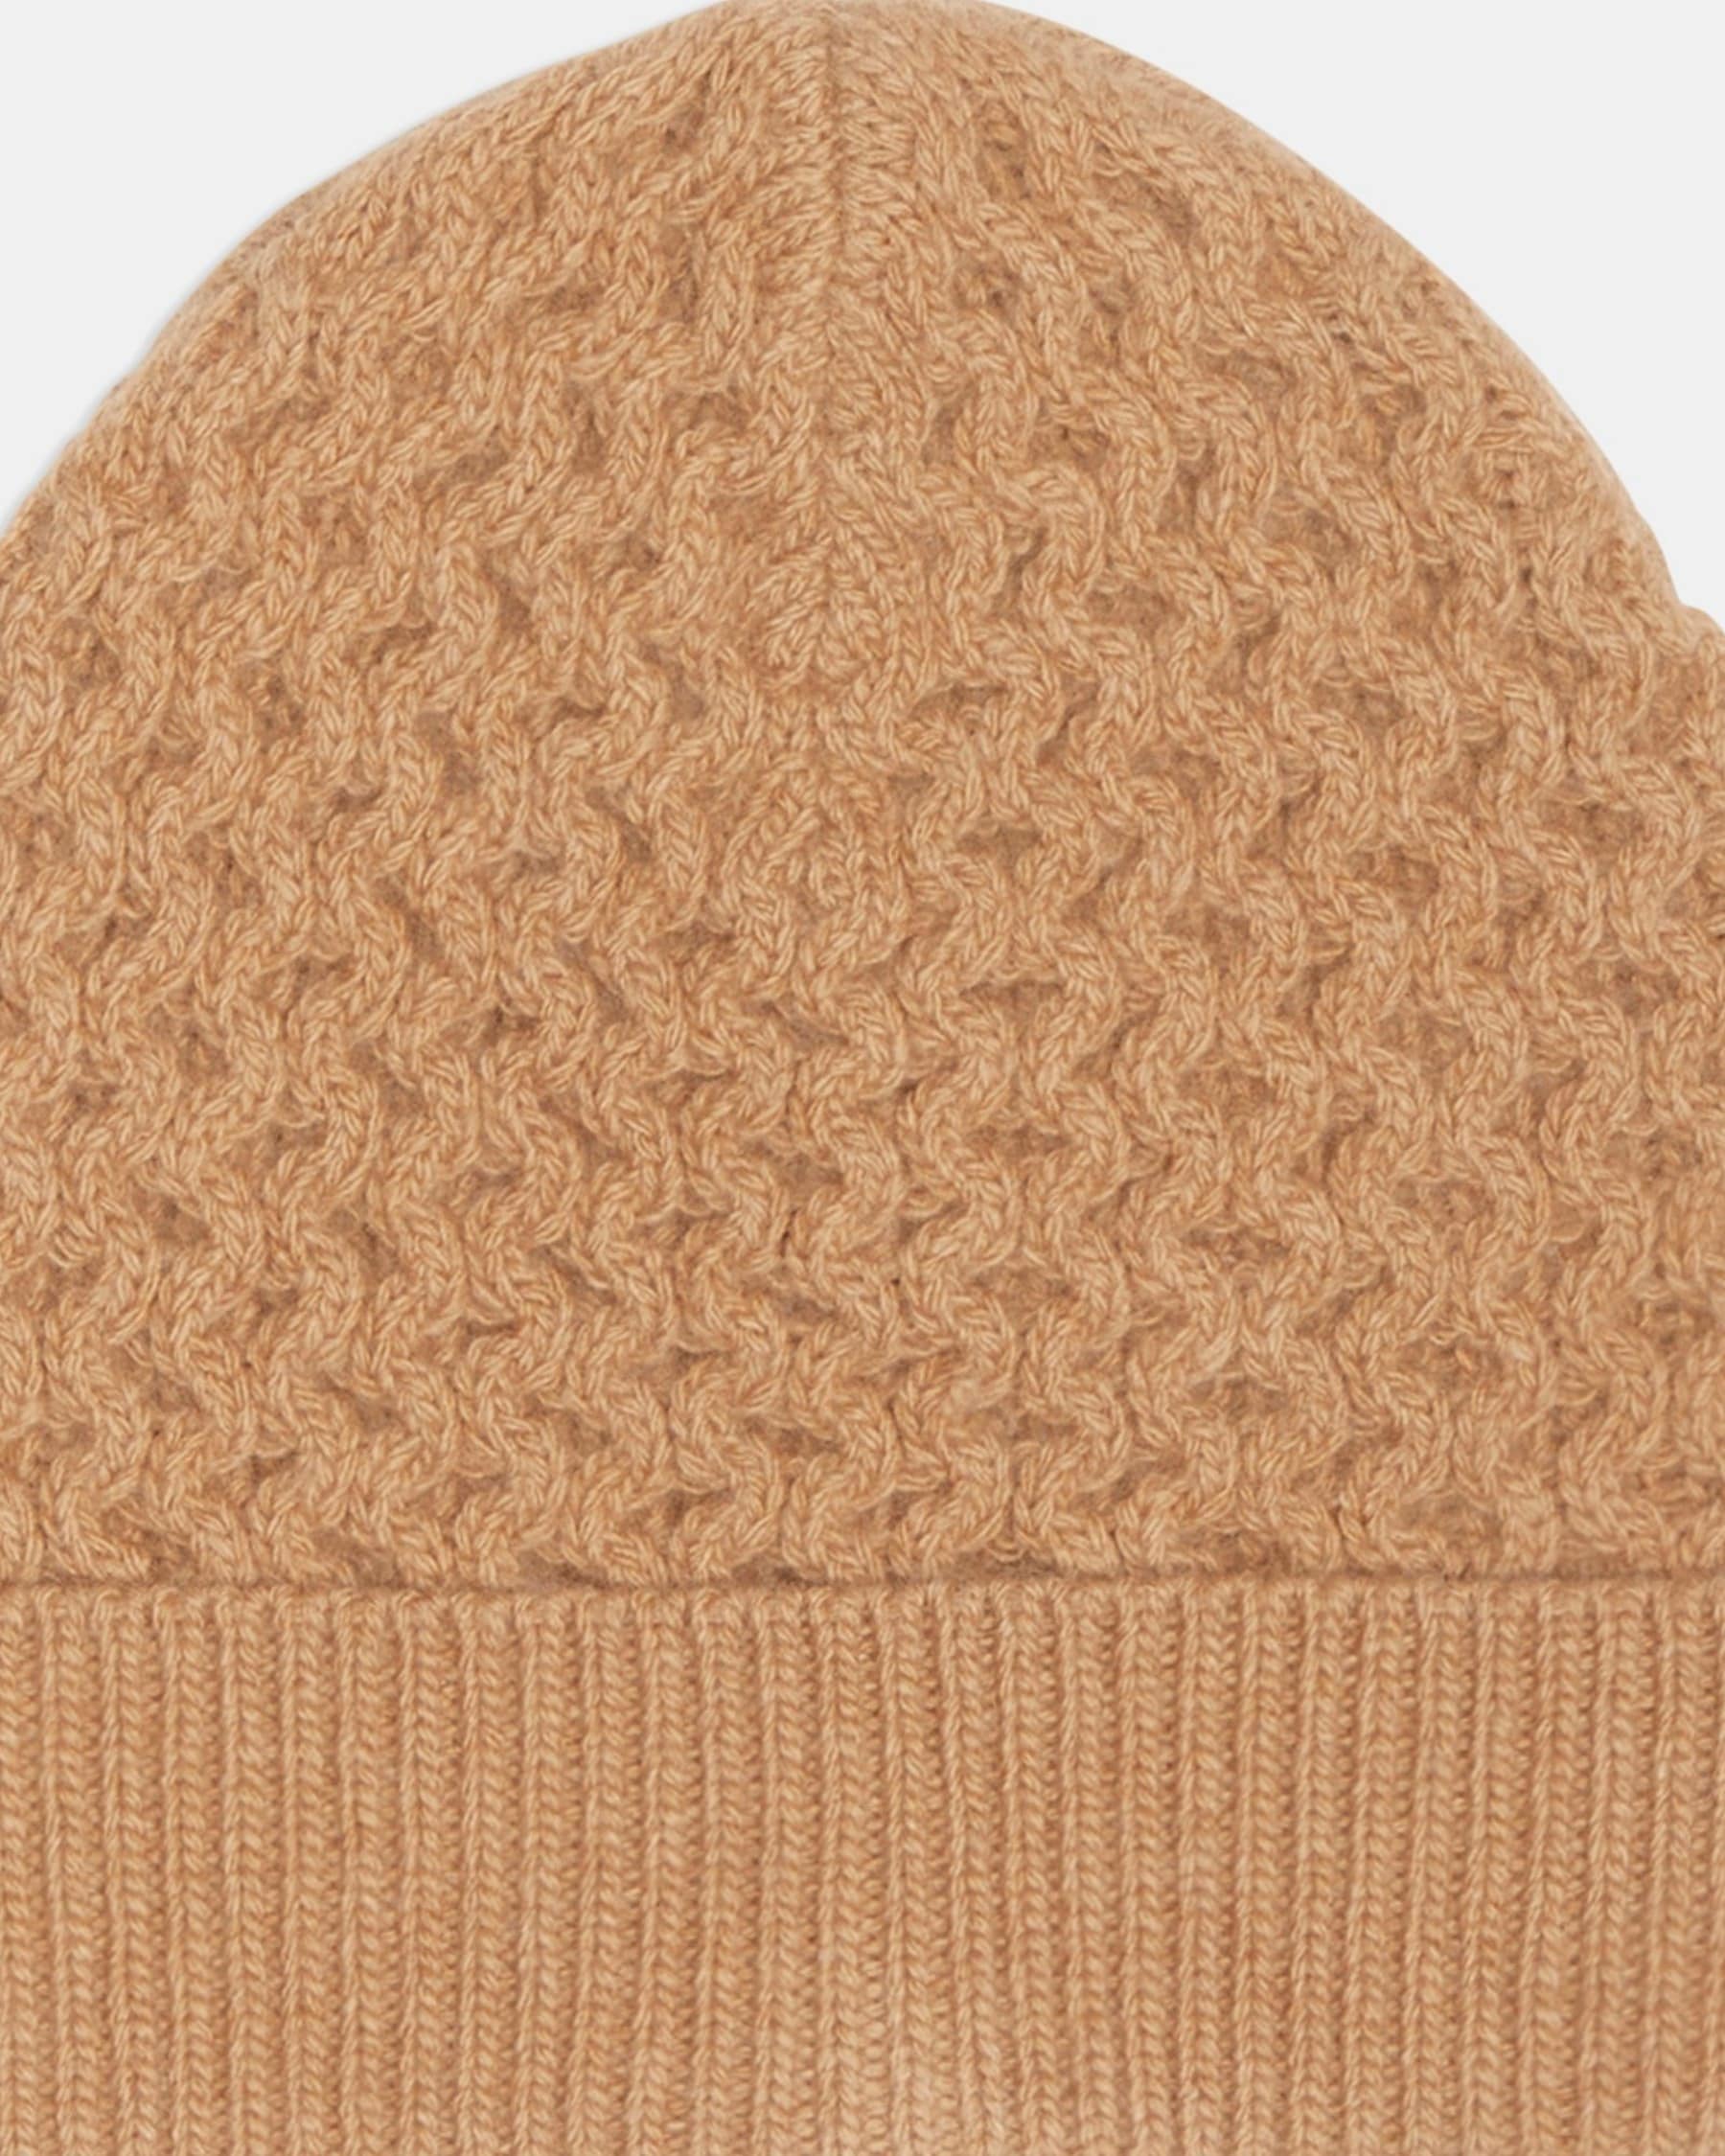 Honeycomb Hat in Felted Wool-Cashmere